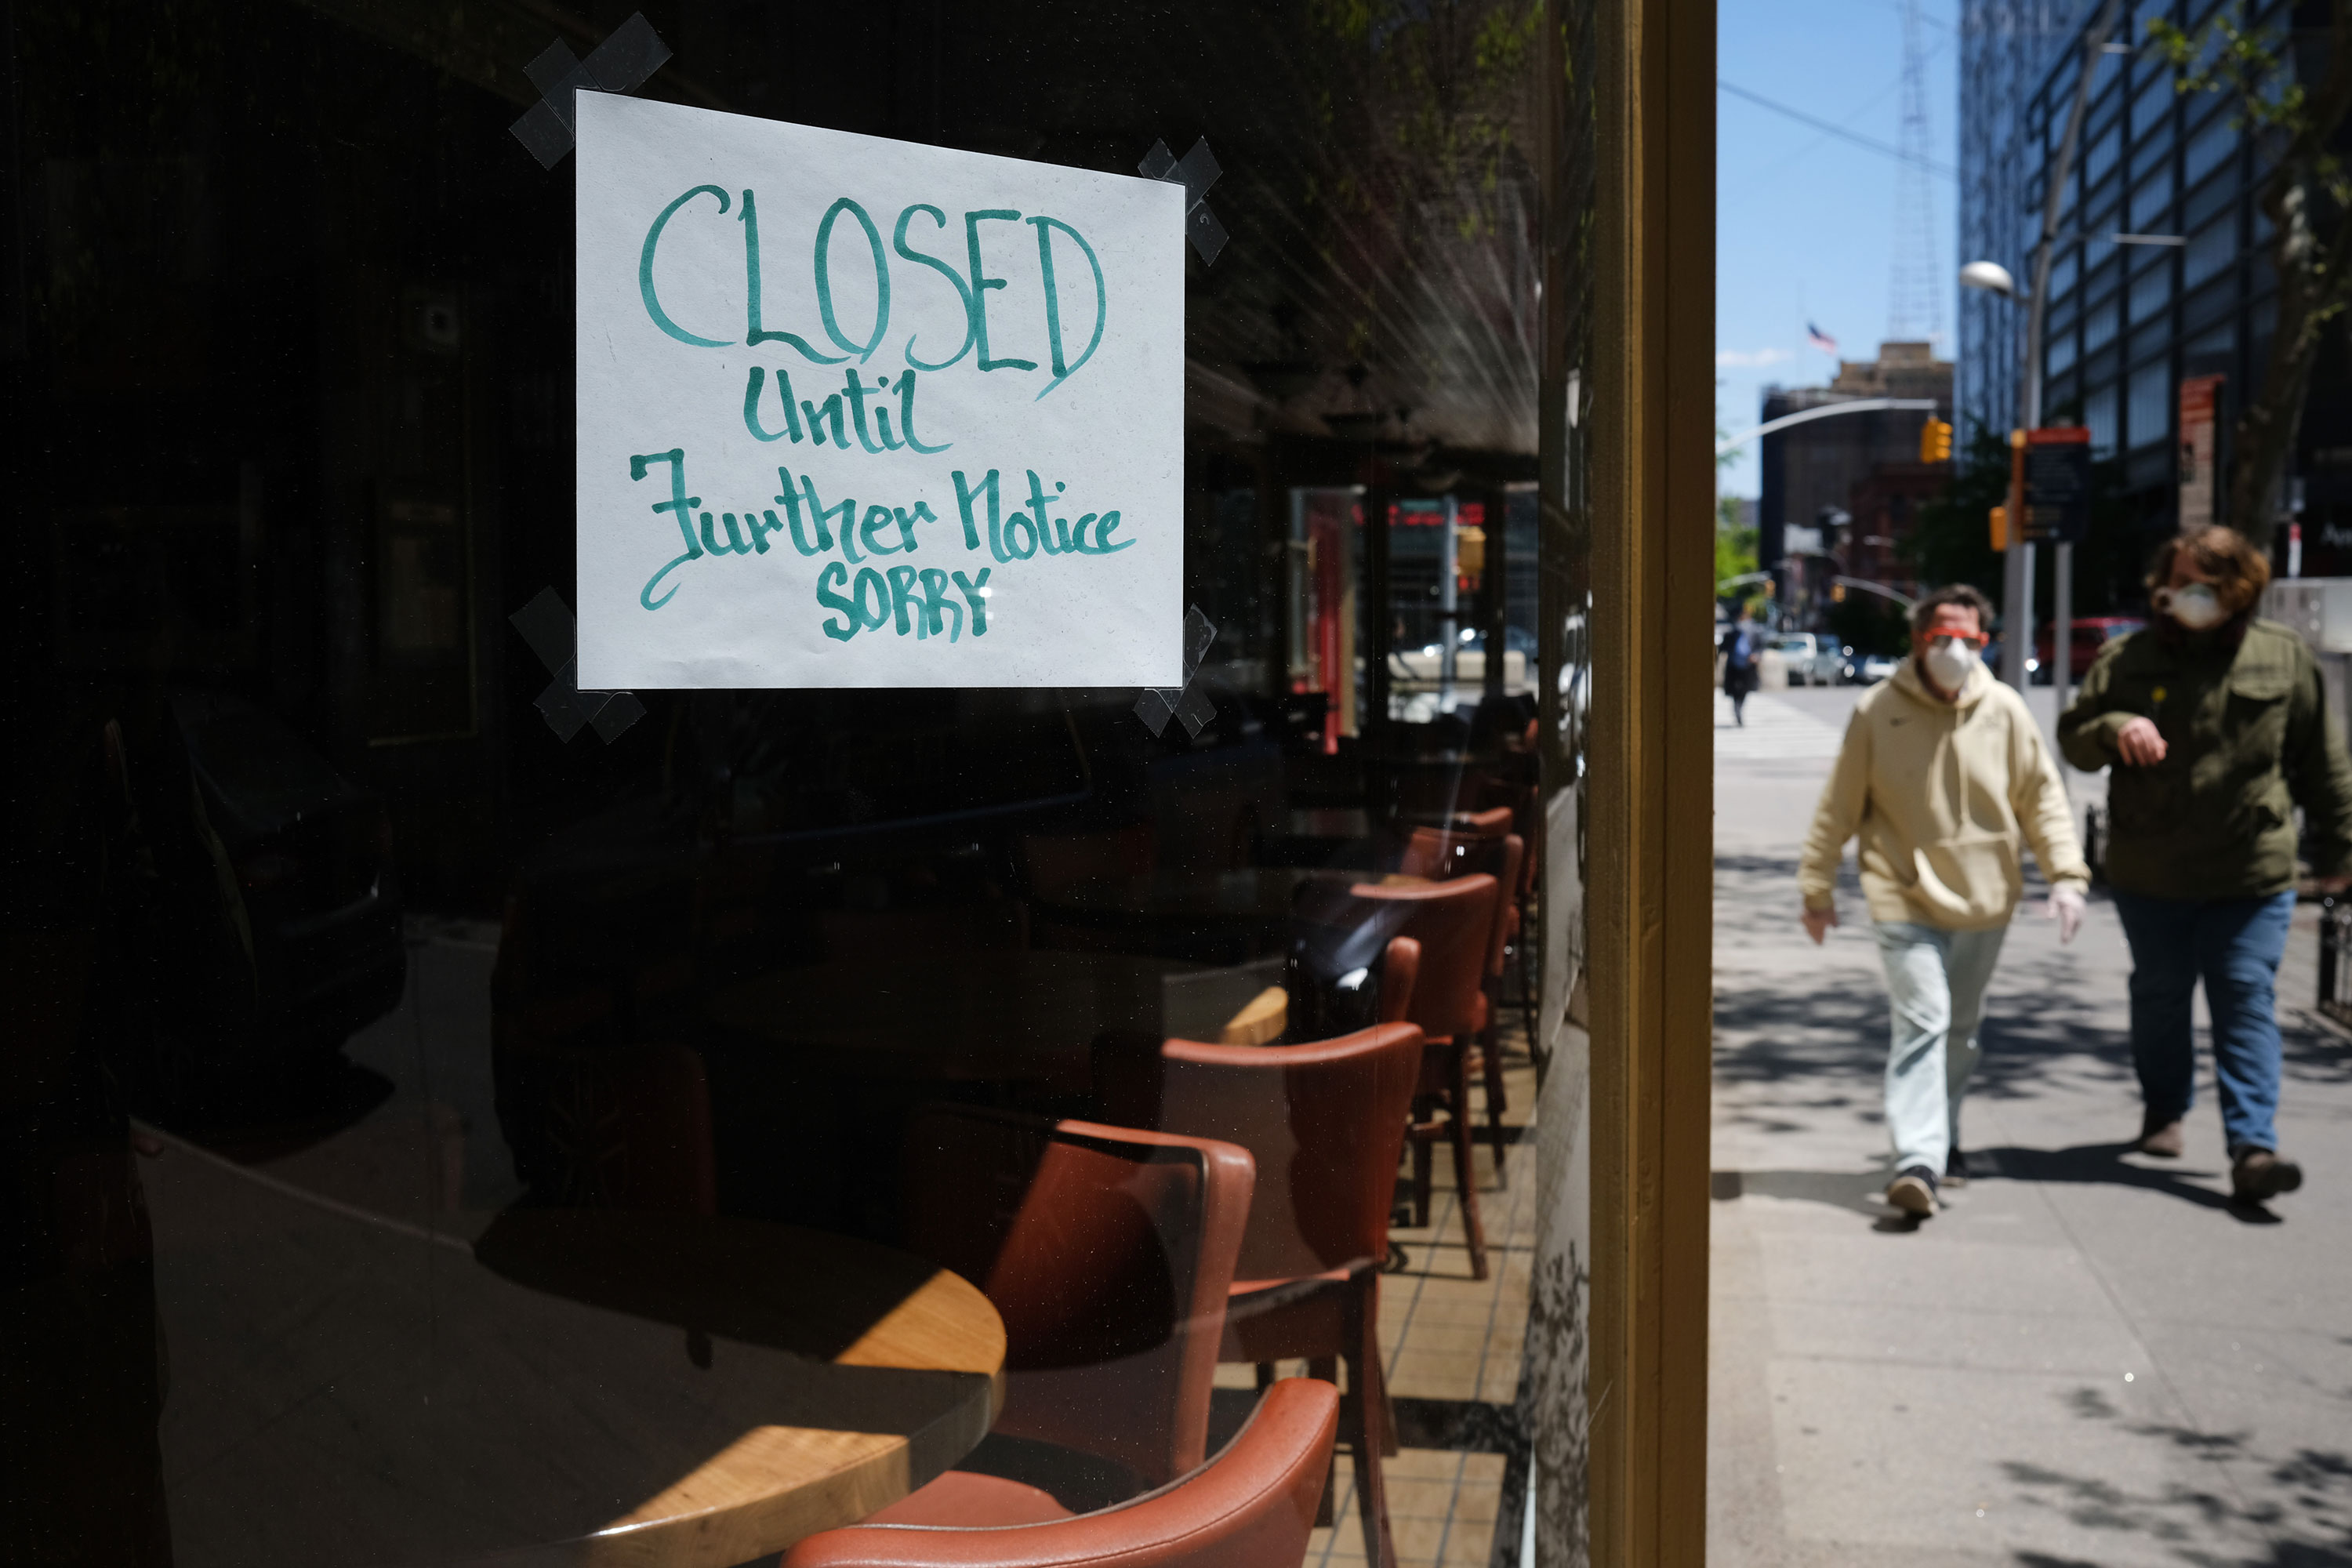 People walk past a shuttered business in Brooklyn on May 12.